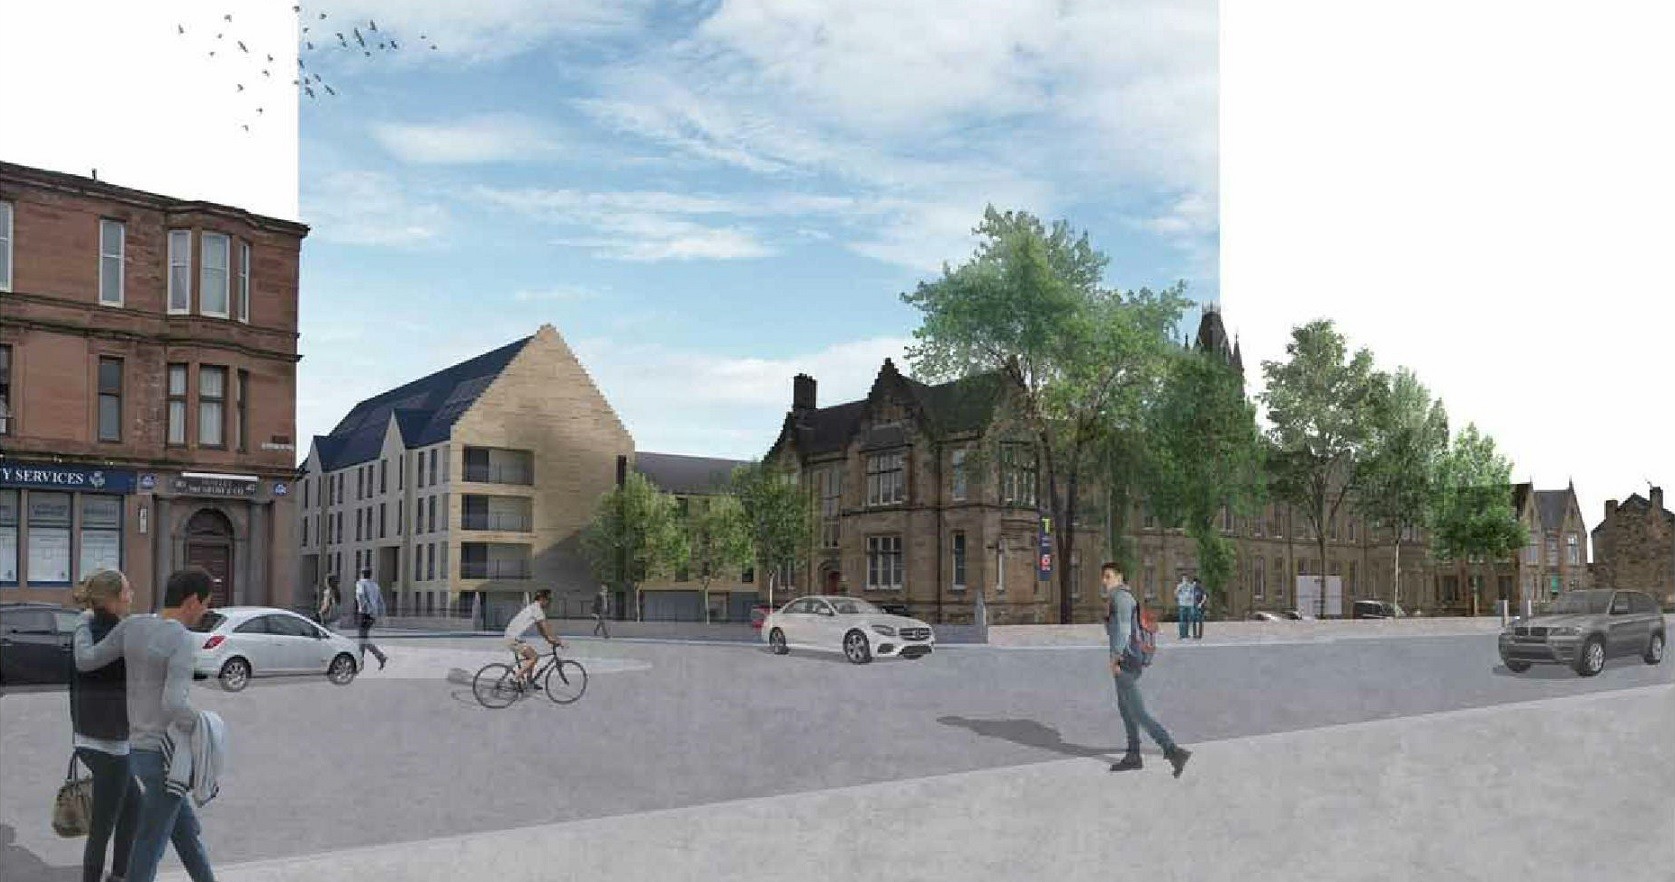 Flats for social rent planned at old Glasgow swimming pool